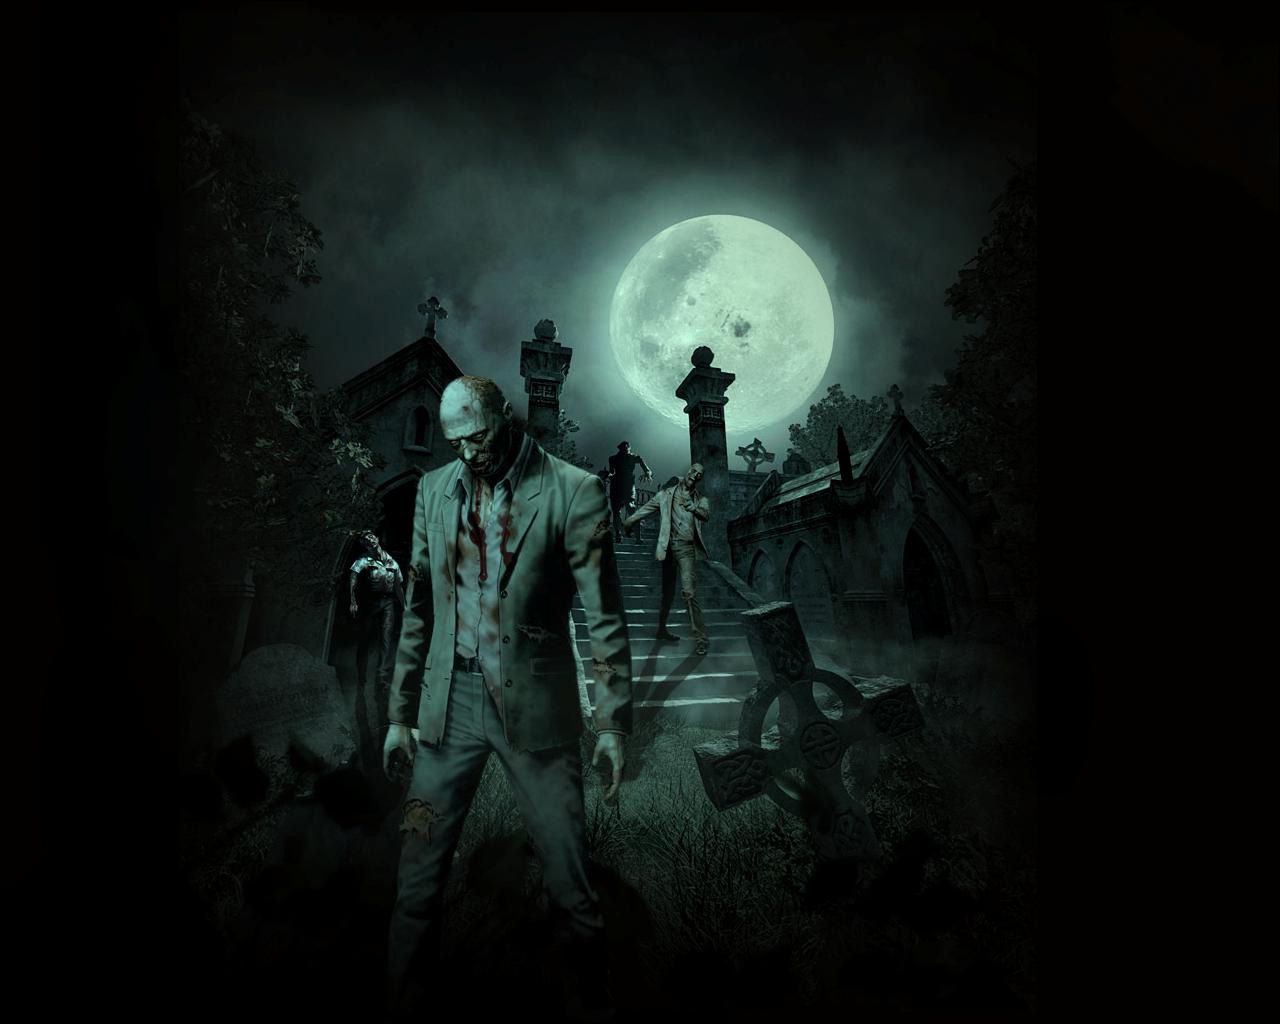 Zombies rising from a grave in a spooky graveyard at night - Horror